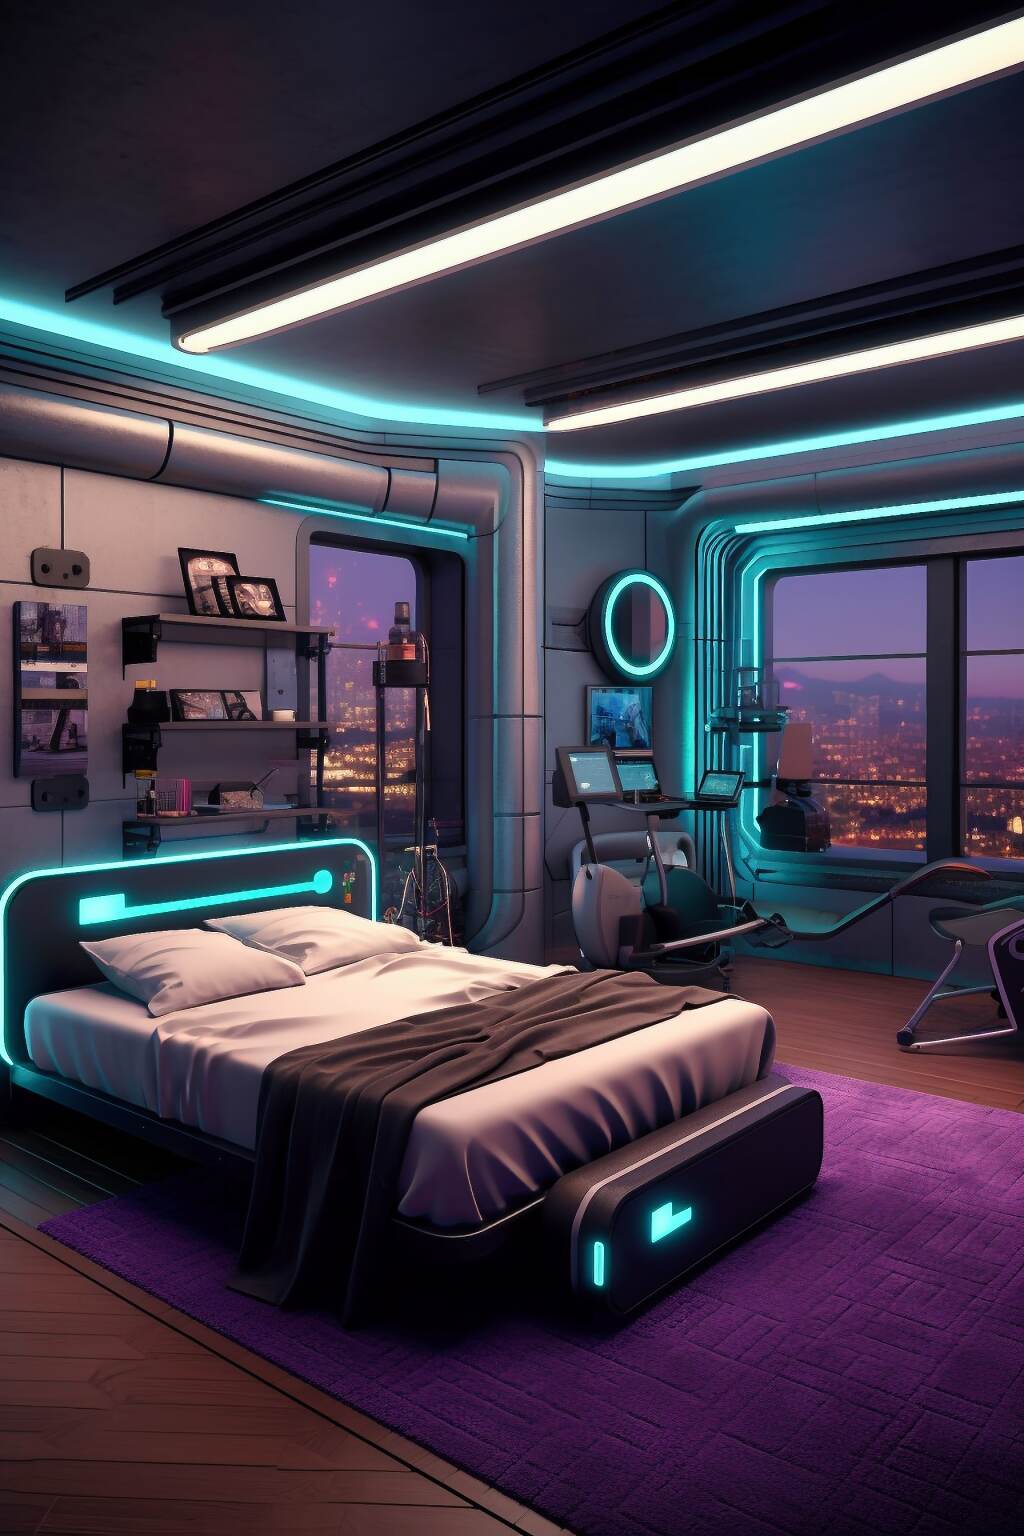 Cyberpunk Fitness-Focused Bedroom -
Energize Your Life